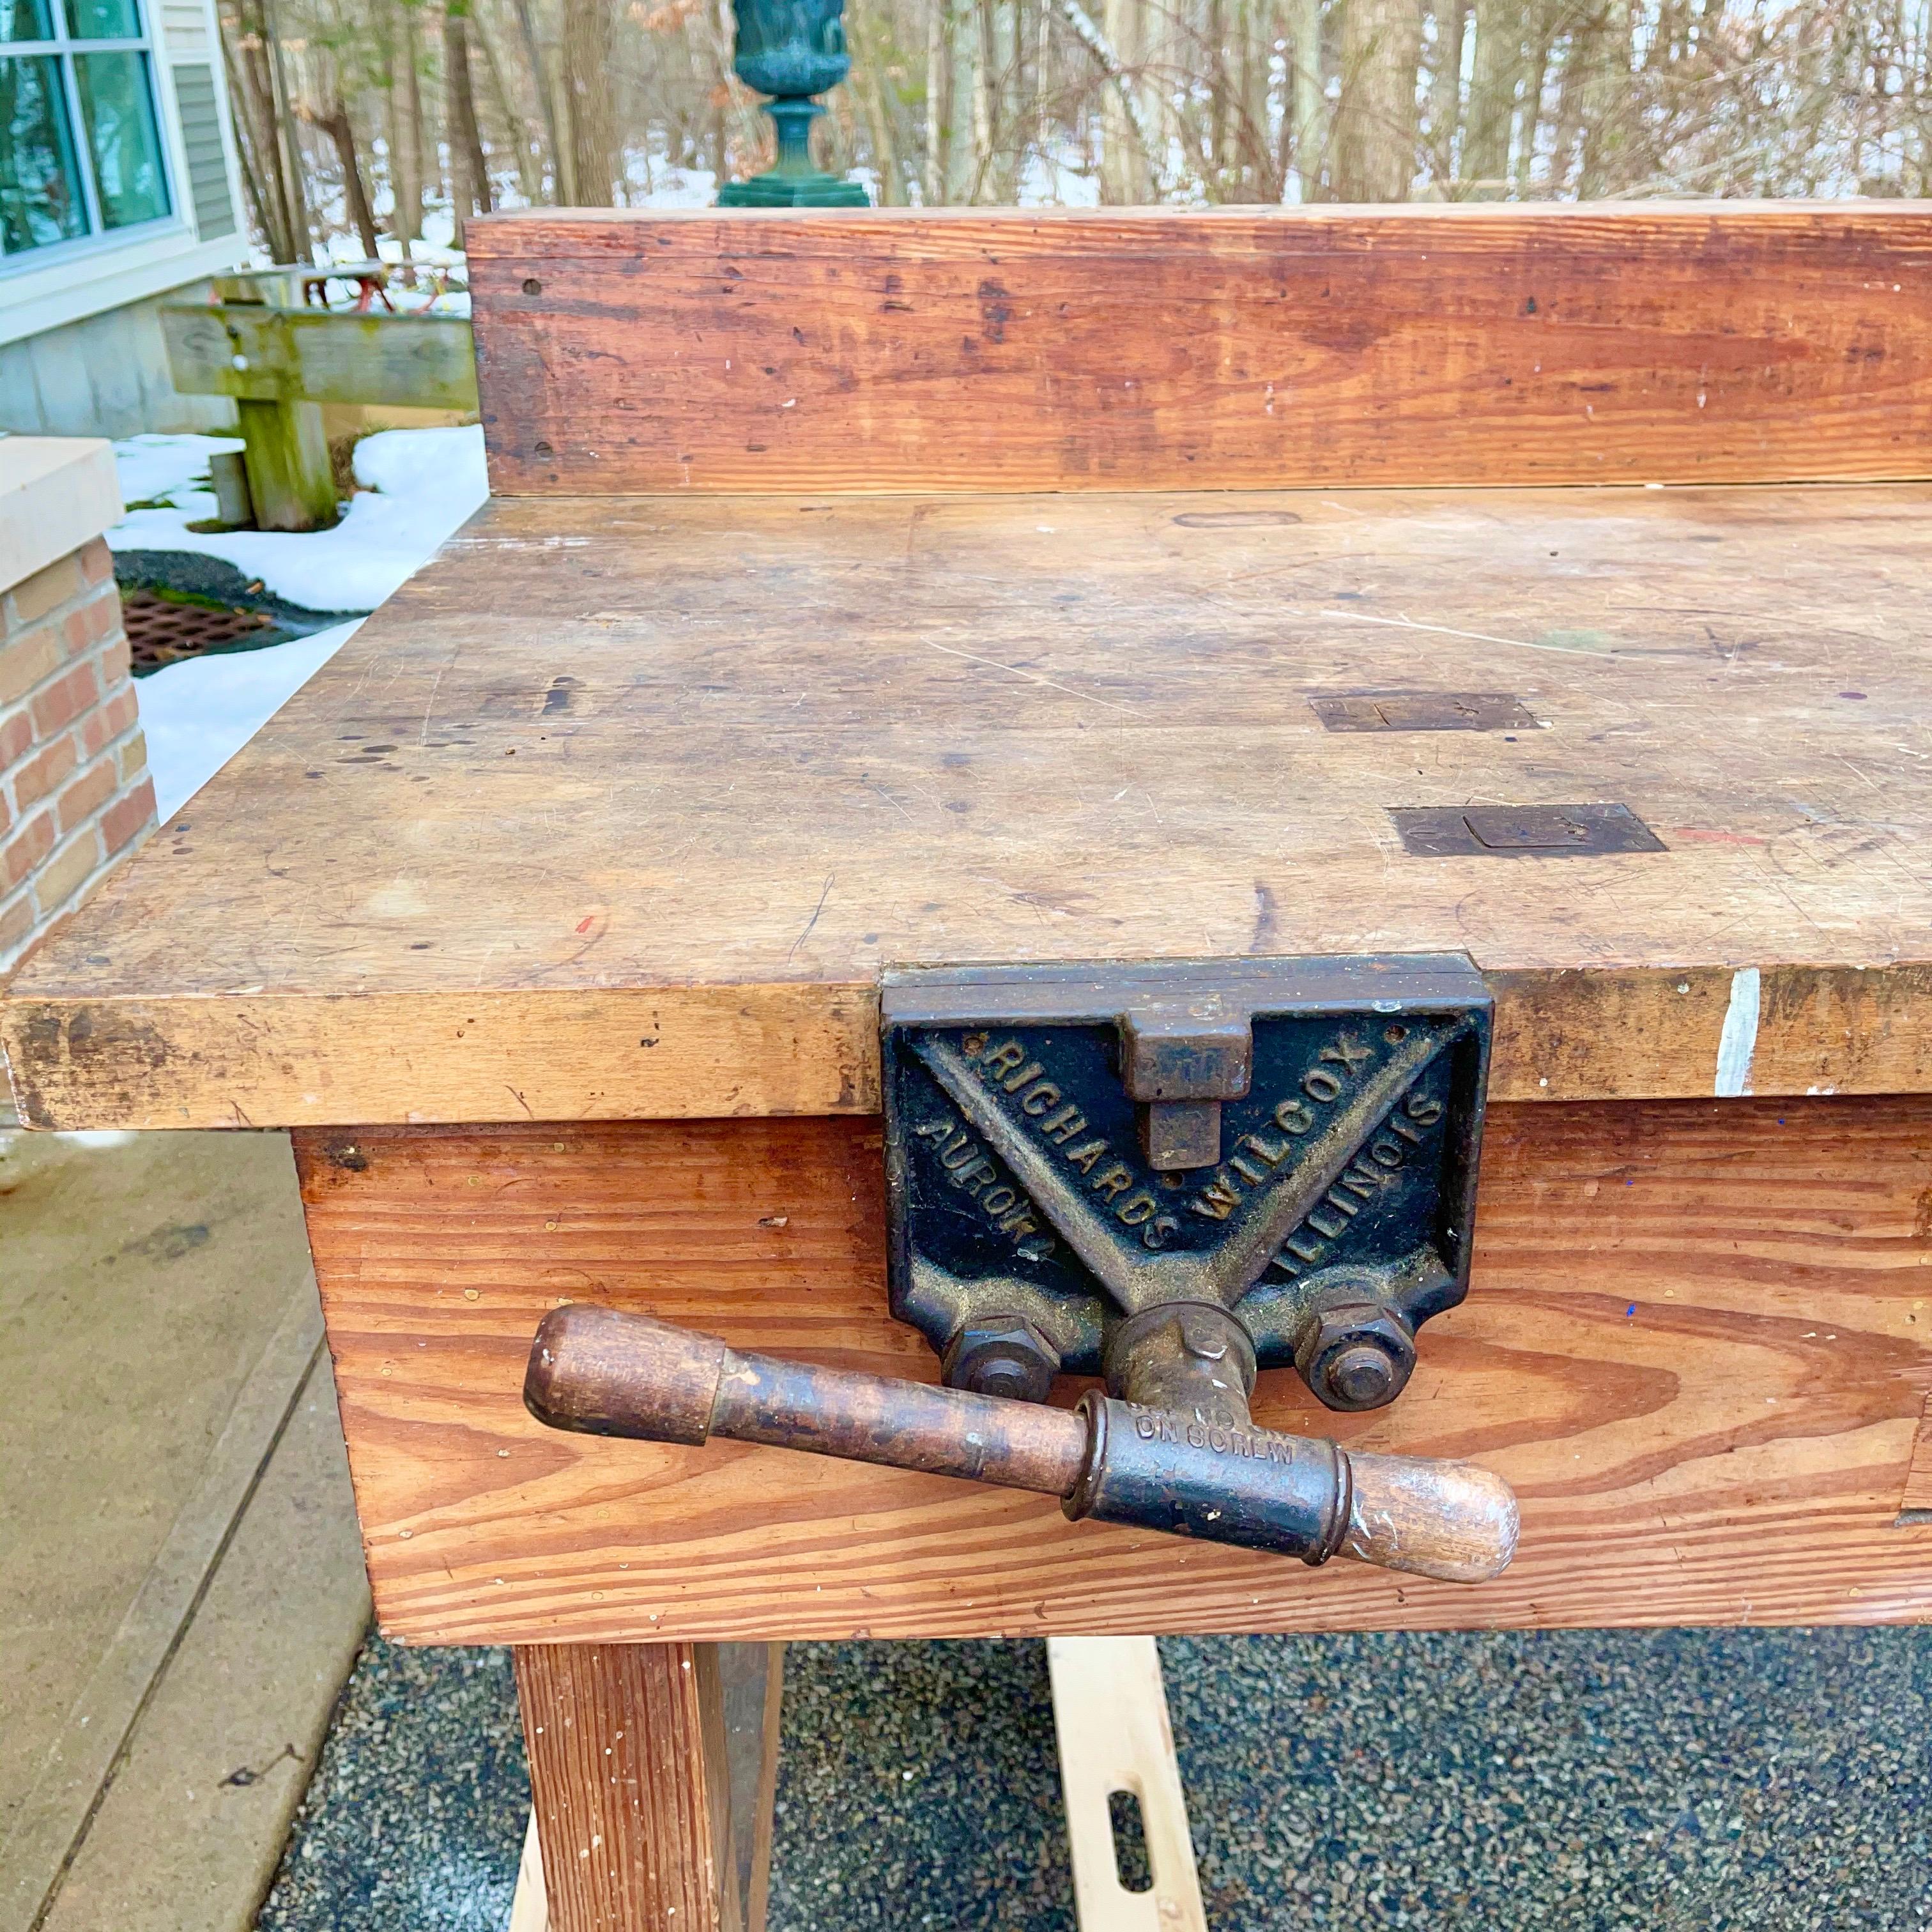 1920s American Built Workshop Table In Fair Condition For Sale In Hanover, MA